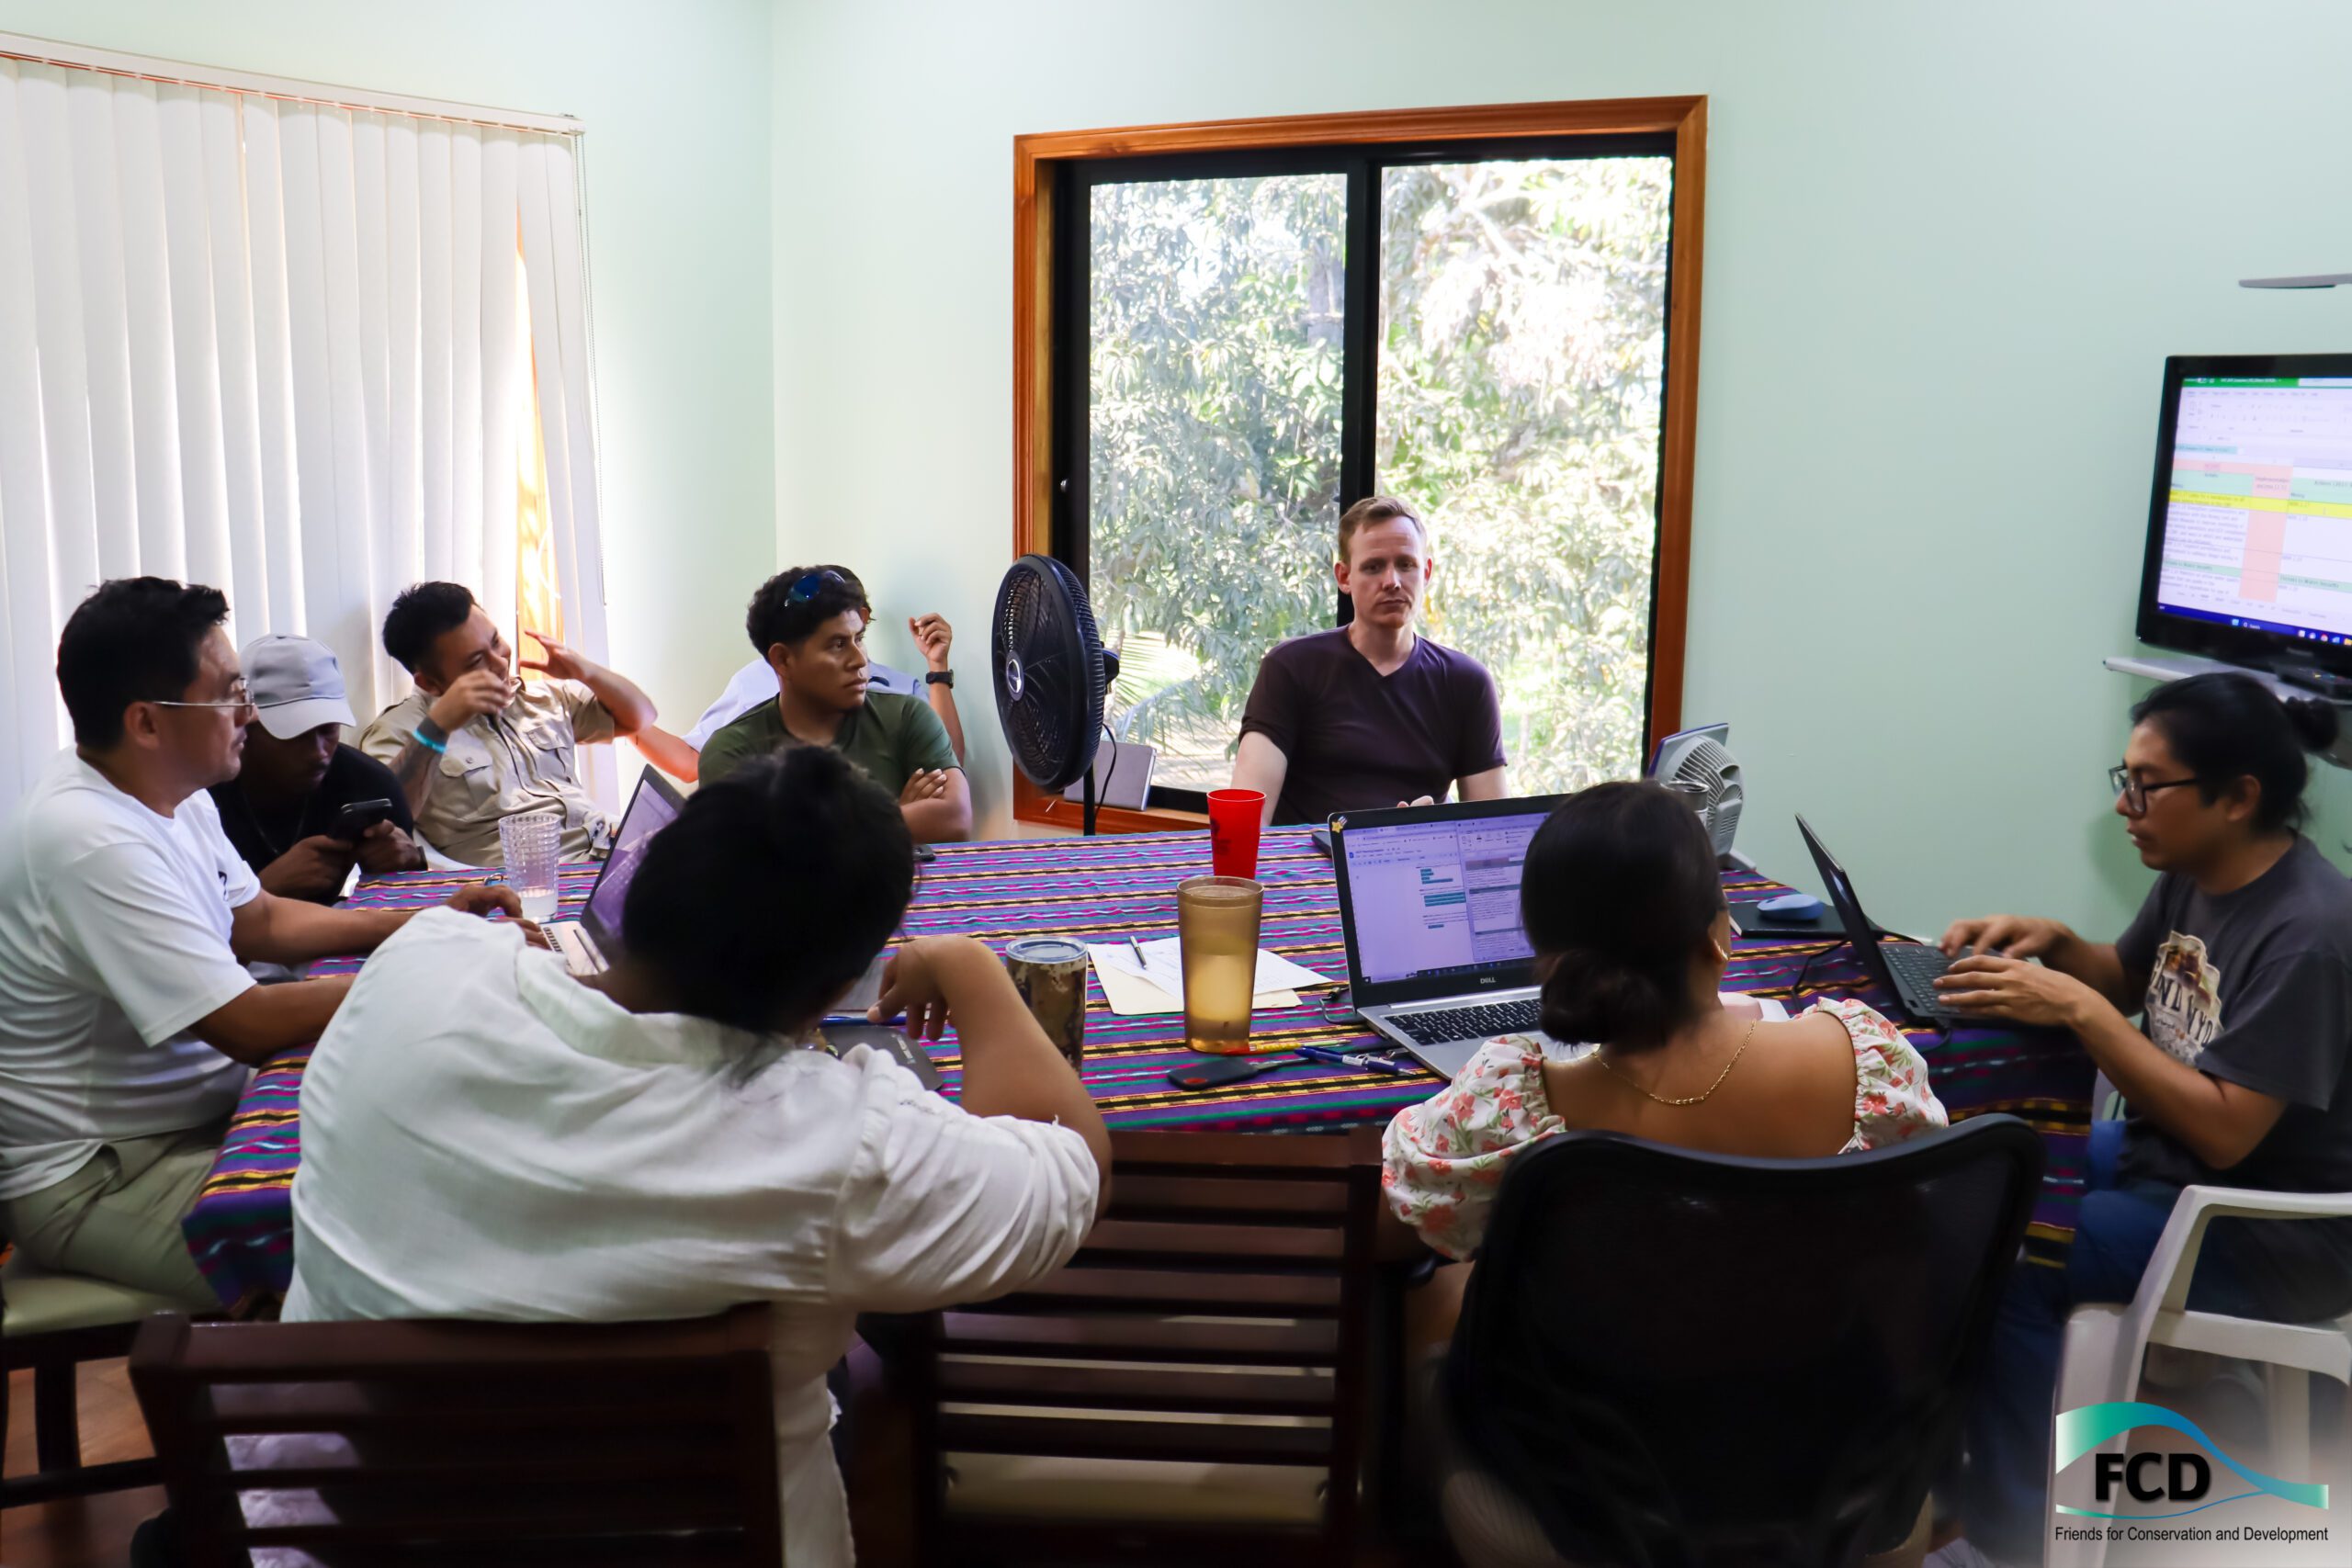 FCD Program Managers have formulated an Annual Operations Plan (AOP) for the upcoming FCD fiscal year regarding management of the Chiquibul National Park.